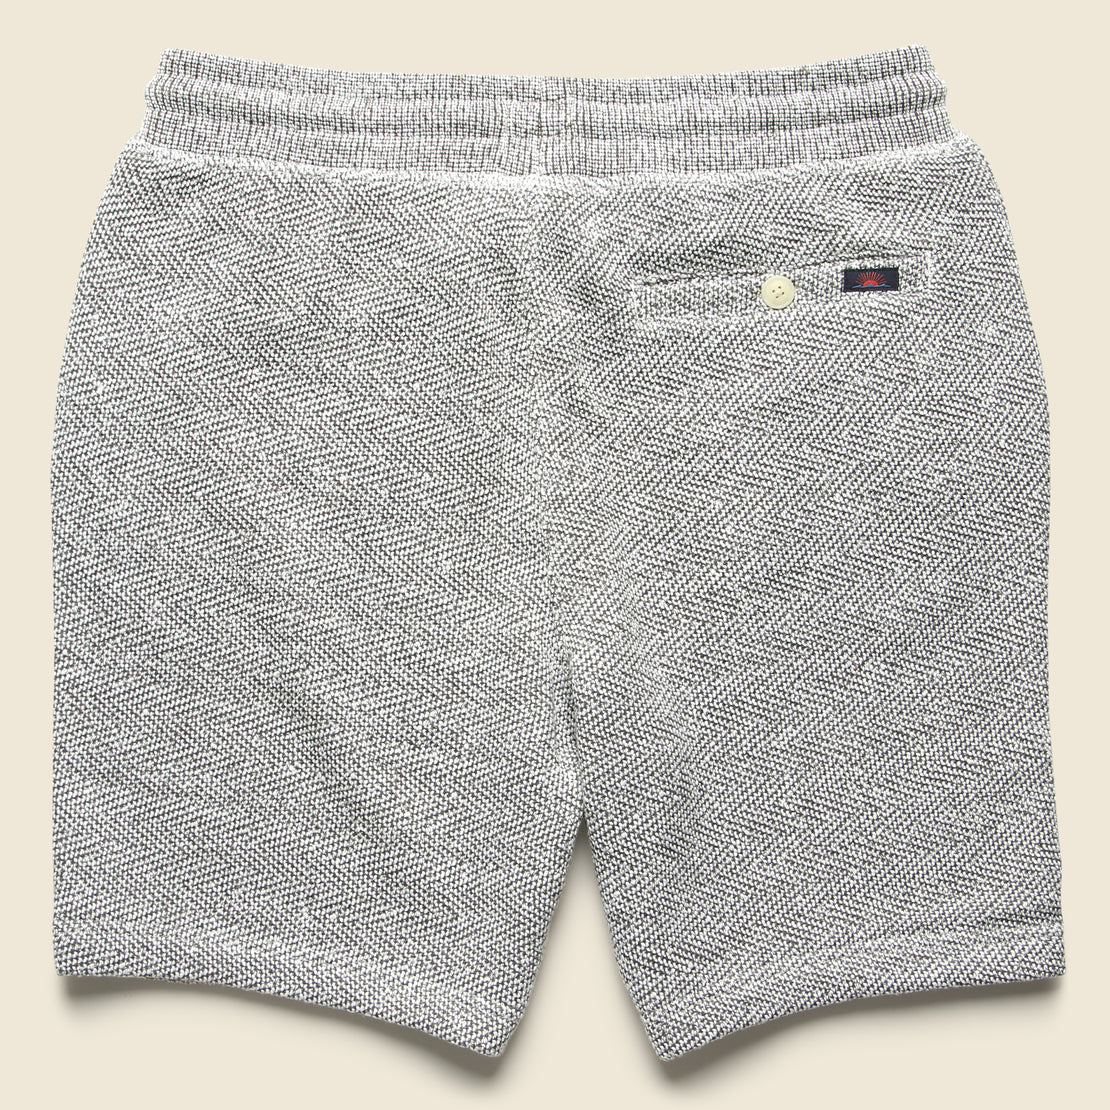 Whitewater Sweatshort - Grey Shell Loop - Faherty - STAG Provisions - Shorts - Lounge